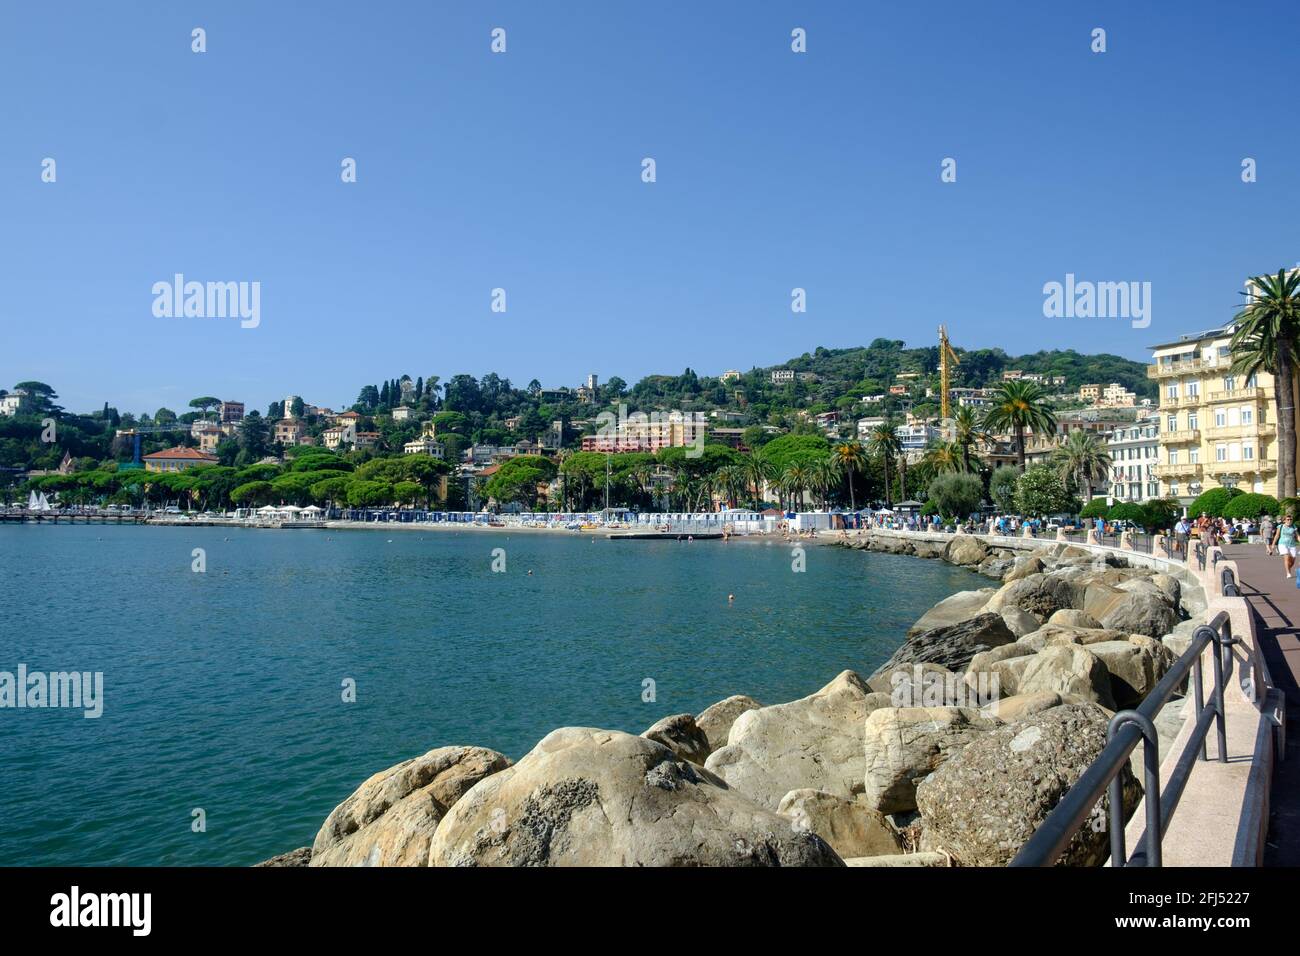 The 'lungomare' of Rapallo curbs along the Ligurian sea. The clear sky and the trees enhance the tropical effect. Stock Photo